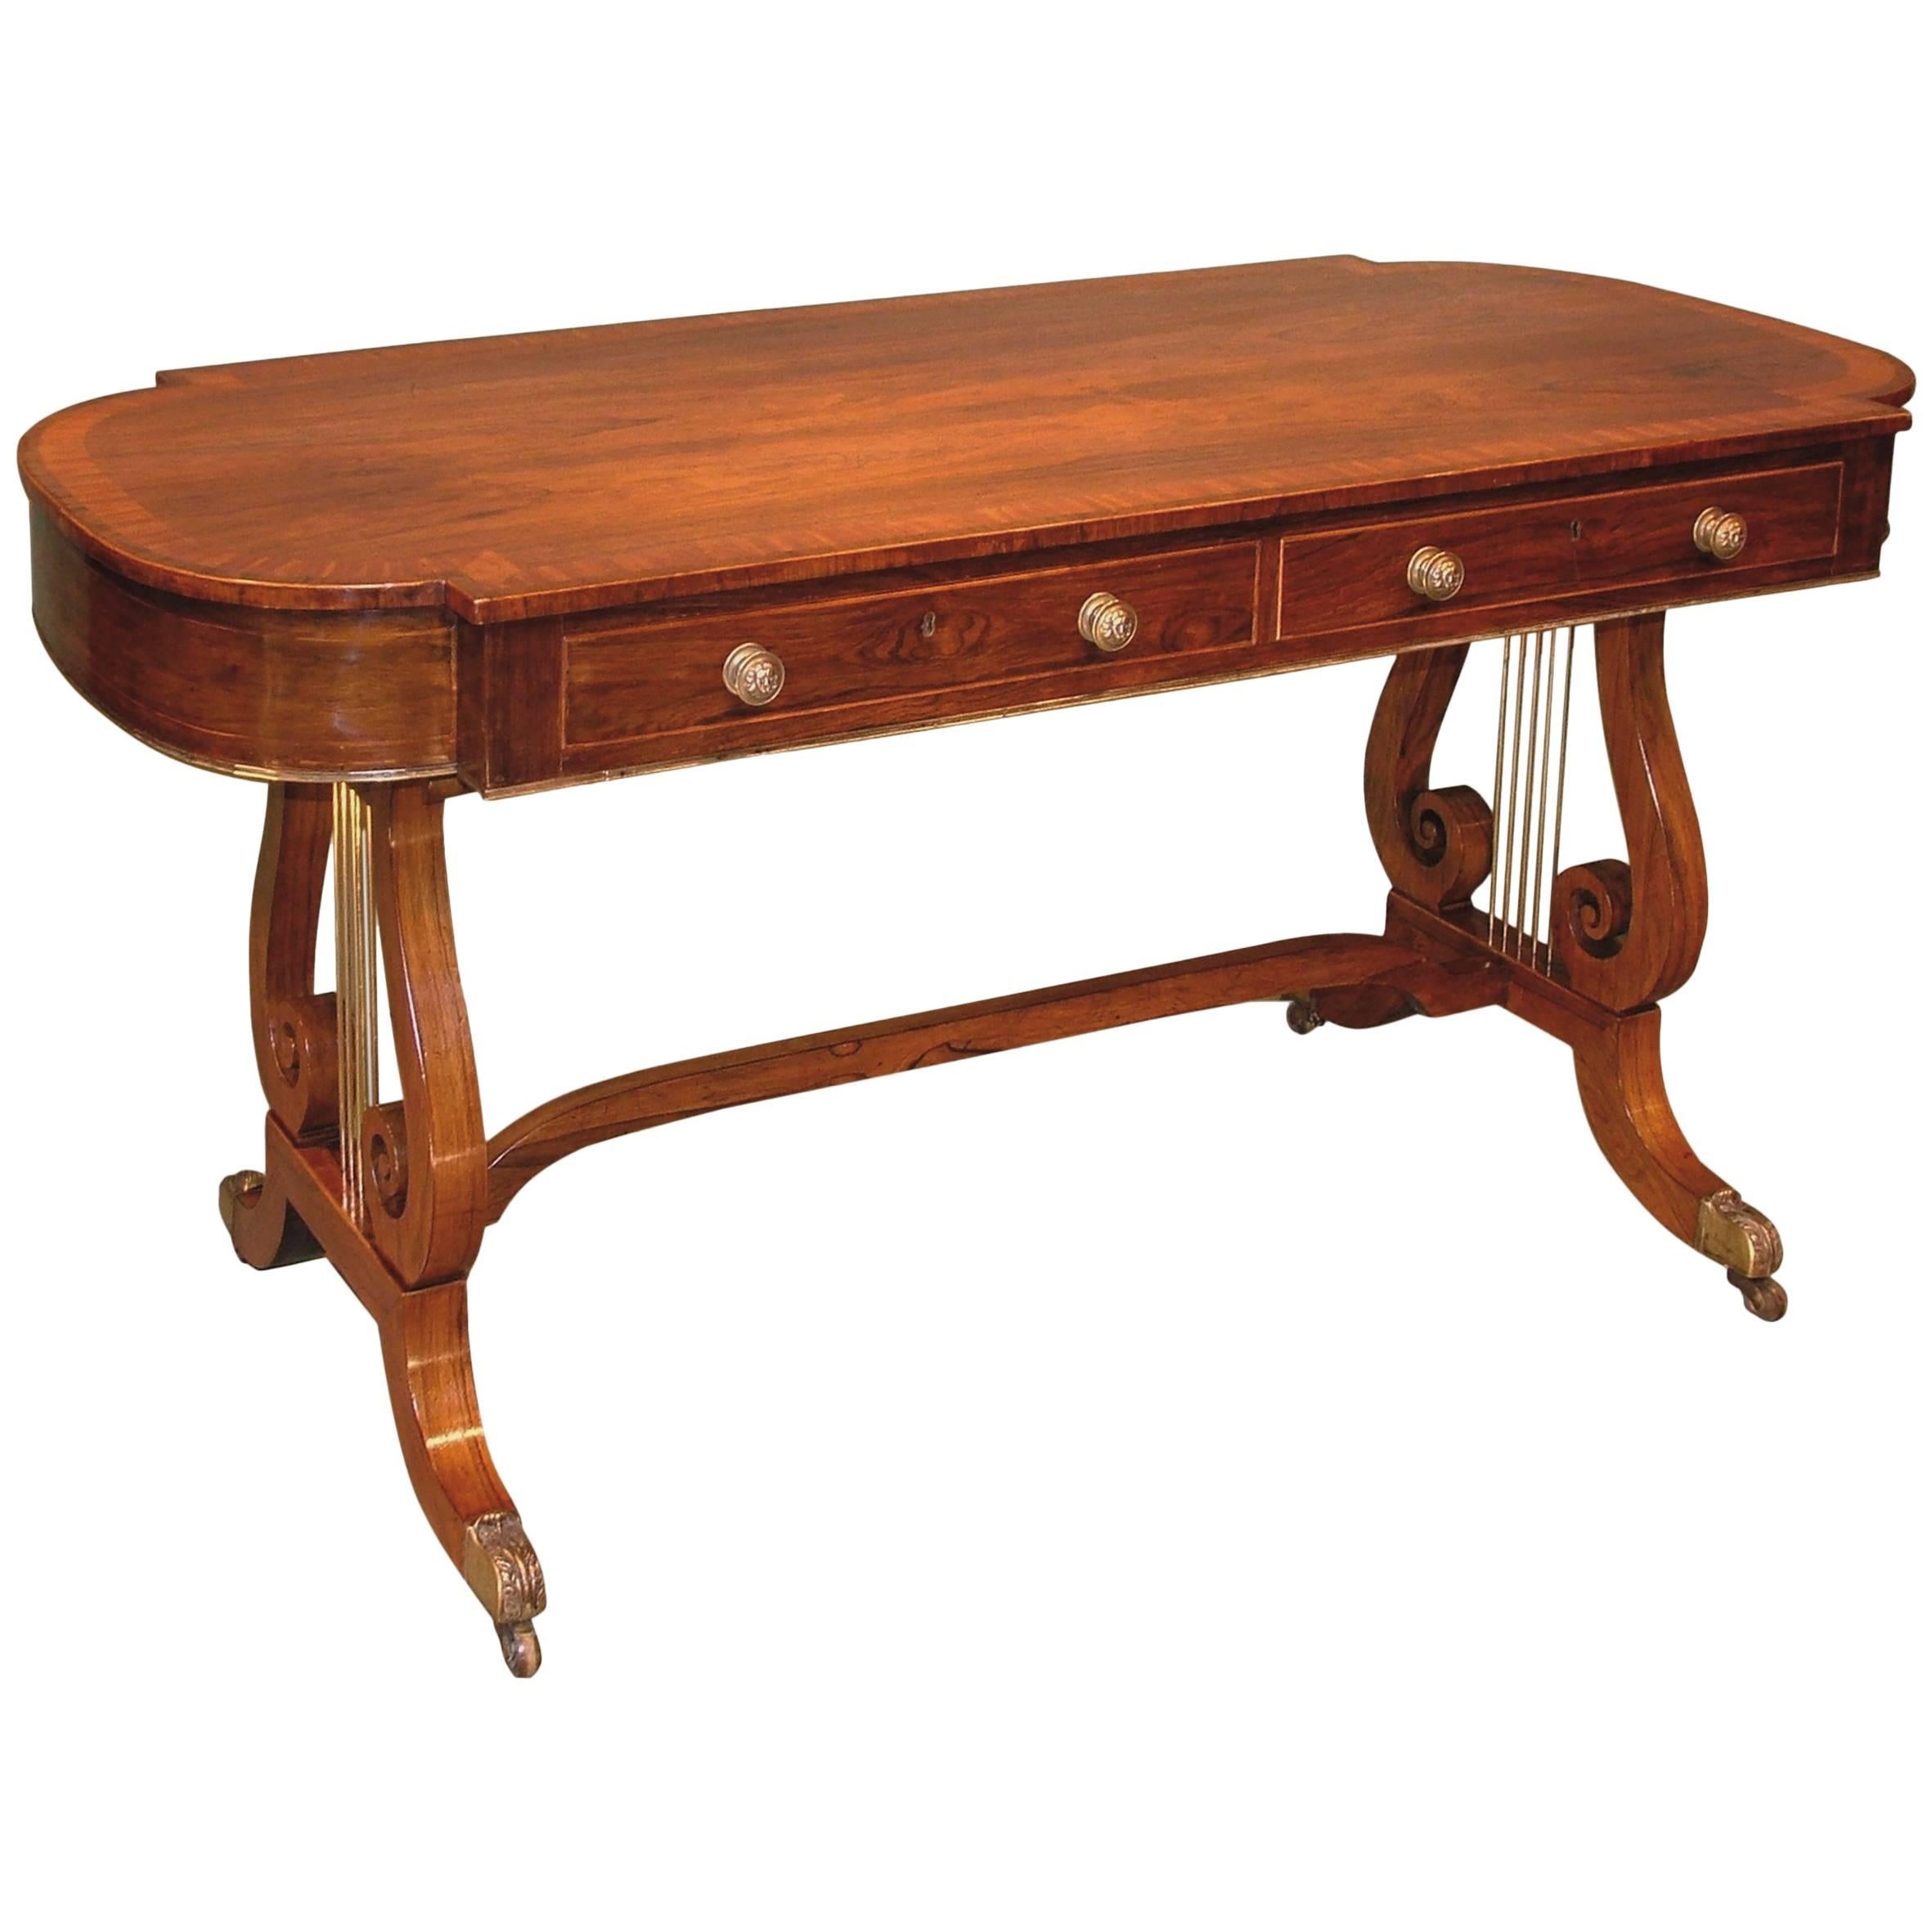 Regency period rosewood writing table with lyre supports